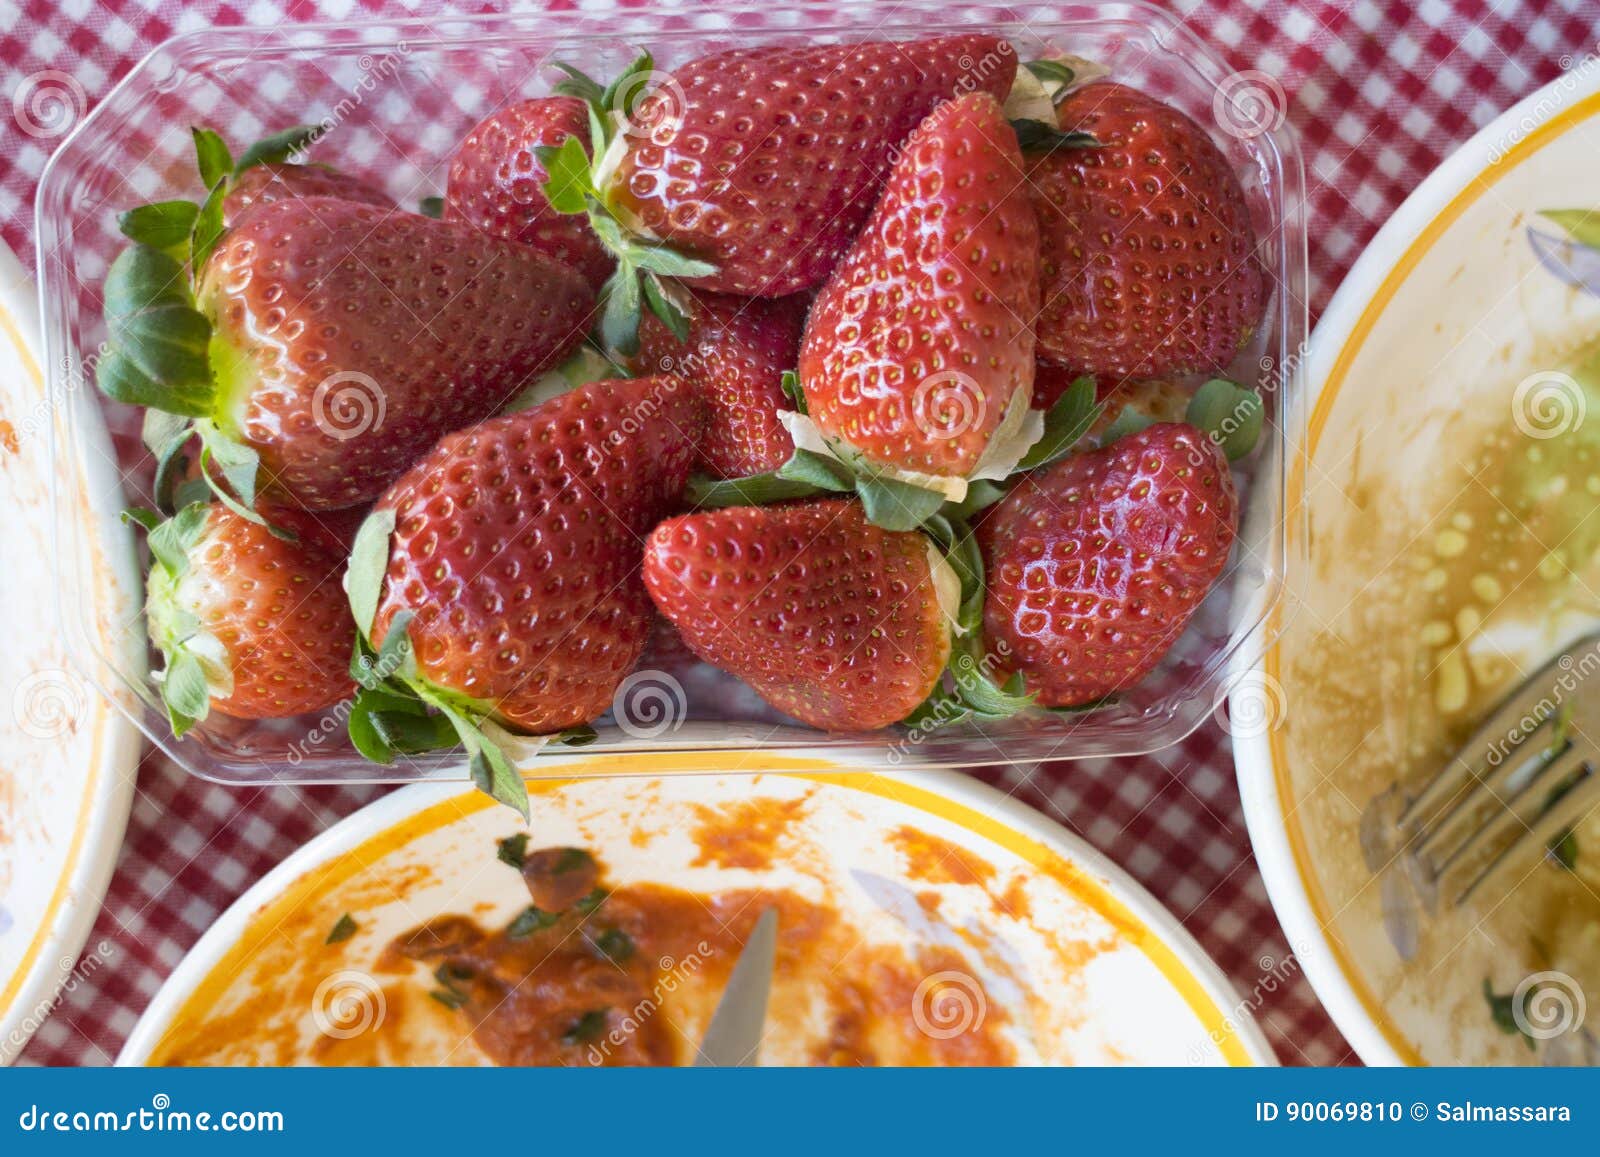 Strawberries in a Plastic Package Stock Photo - Image of fresh, food ...